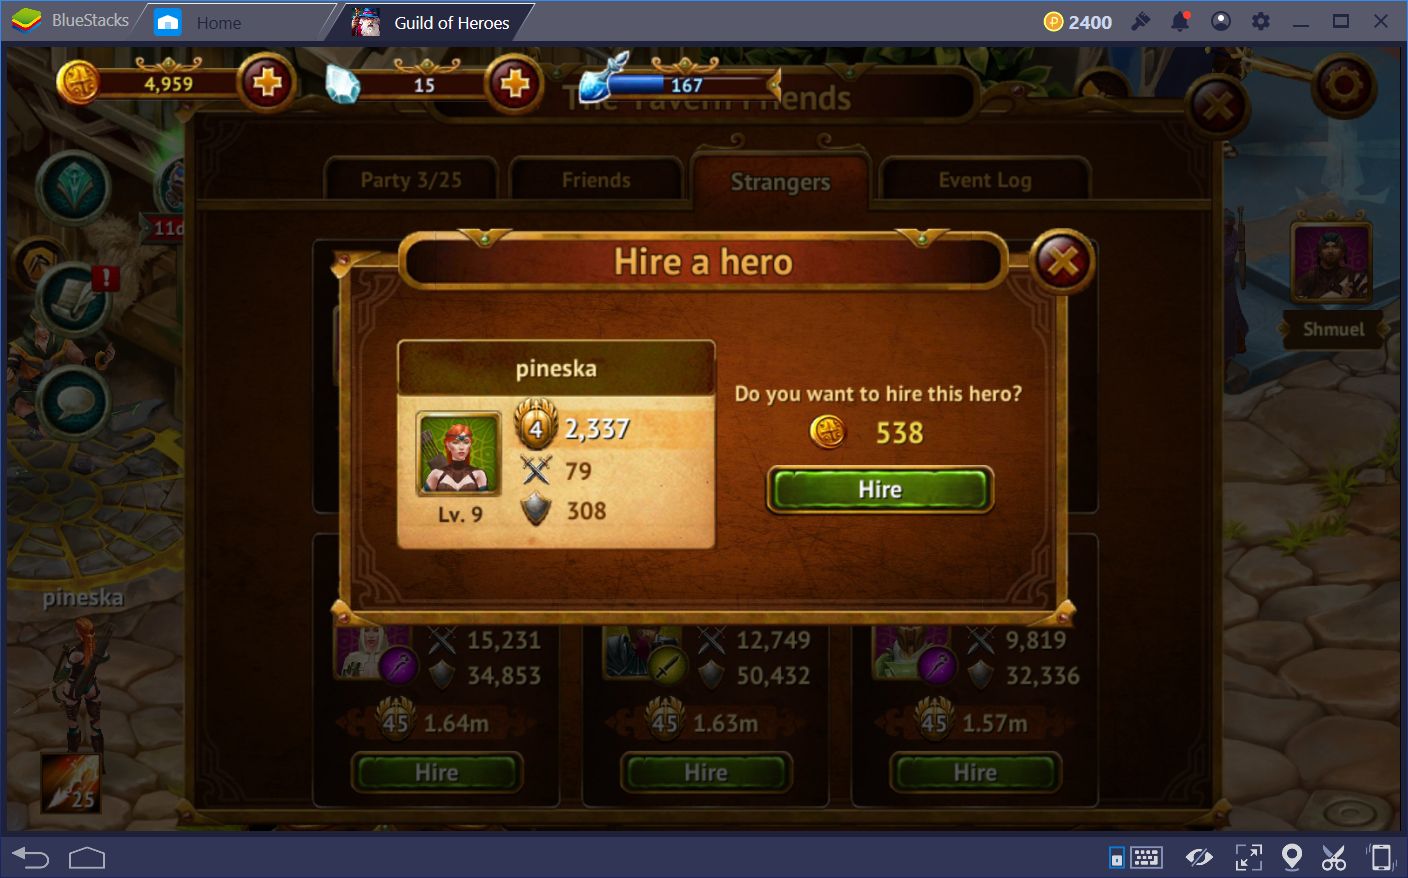 How to Use the Tavern in Guild of Heroes